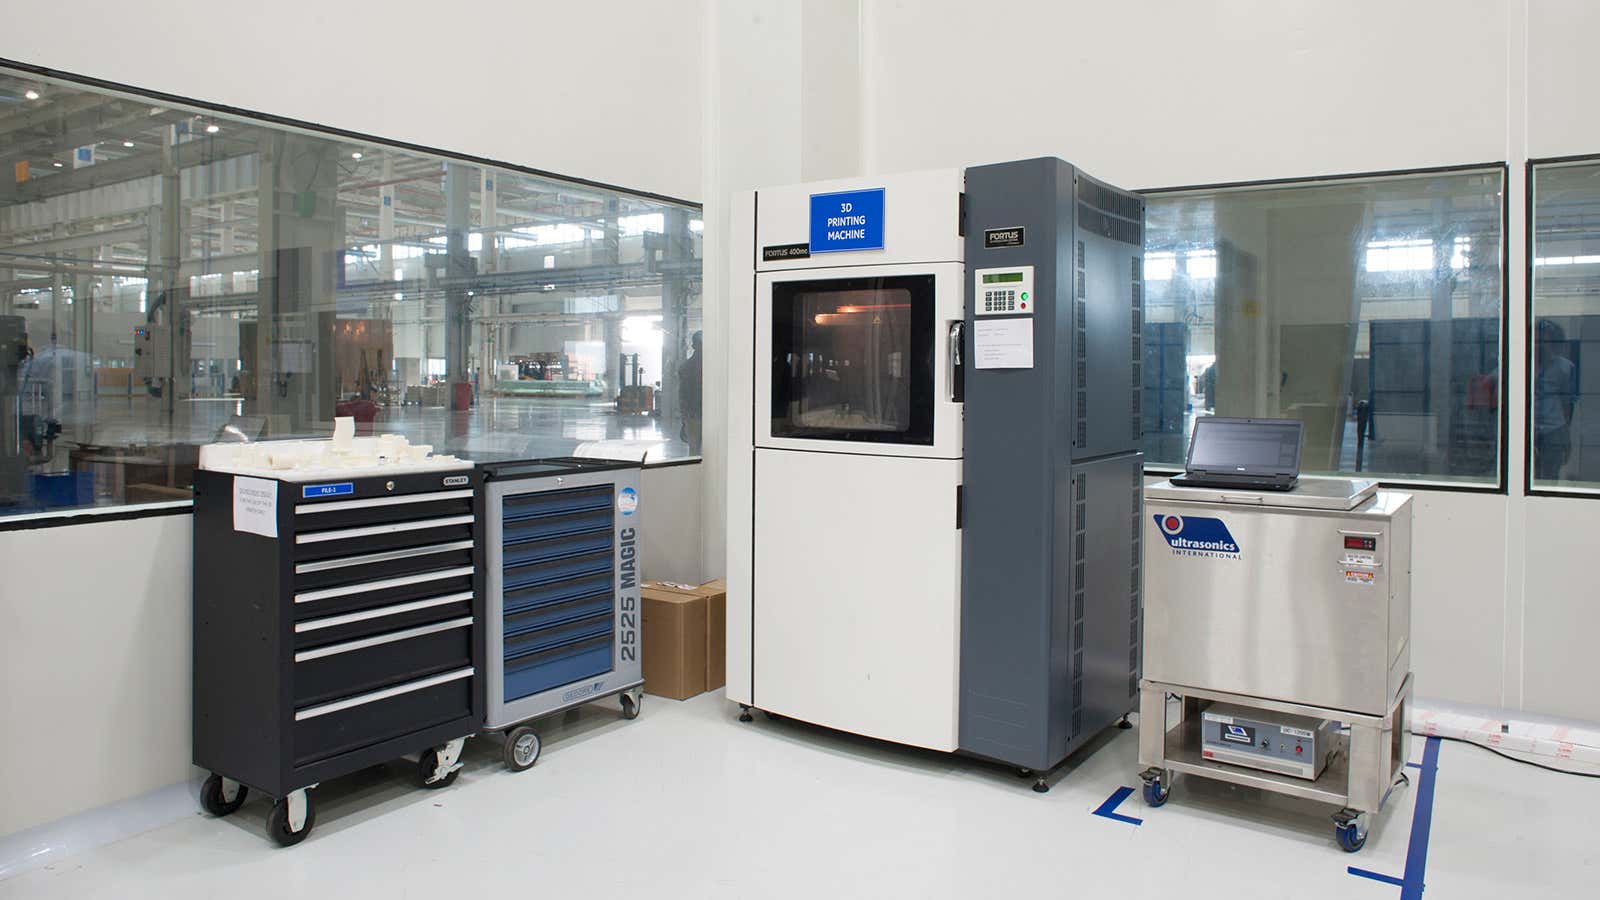 GE’s multi-modal manufacturing facility in Pune is outfitted for 3D printing.